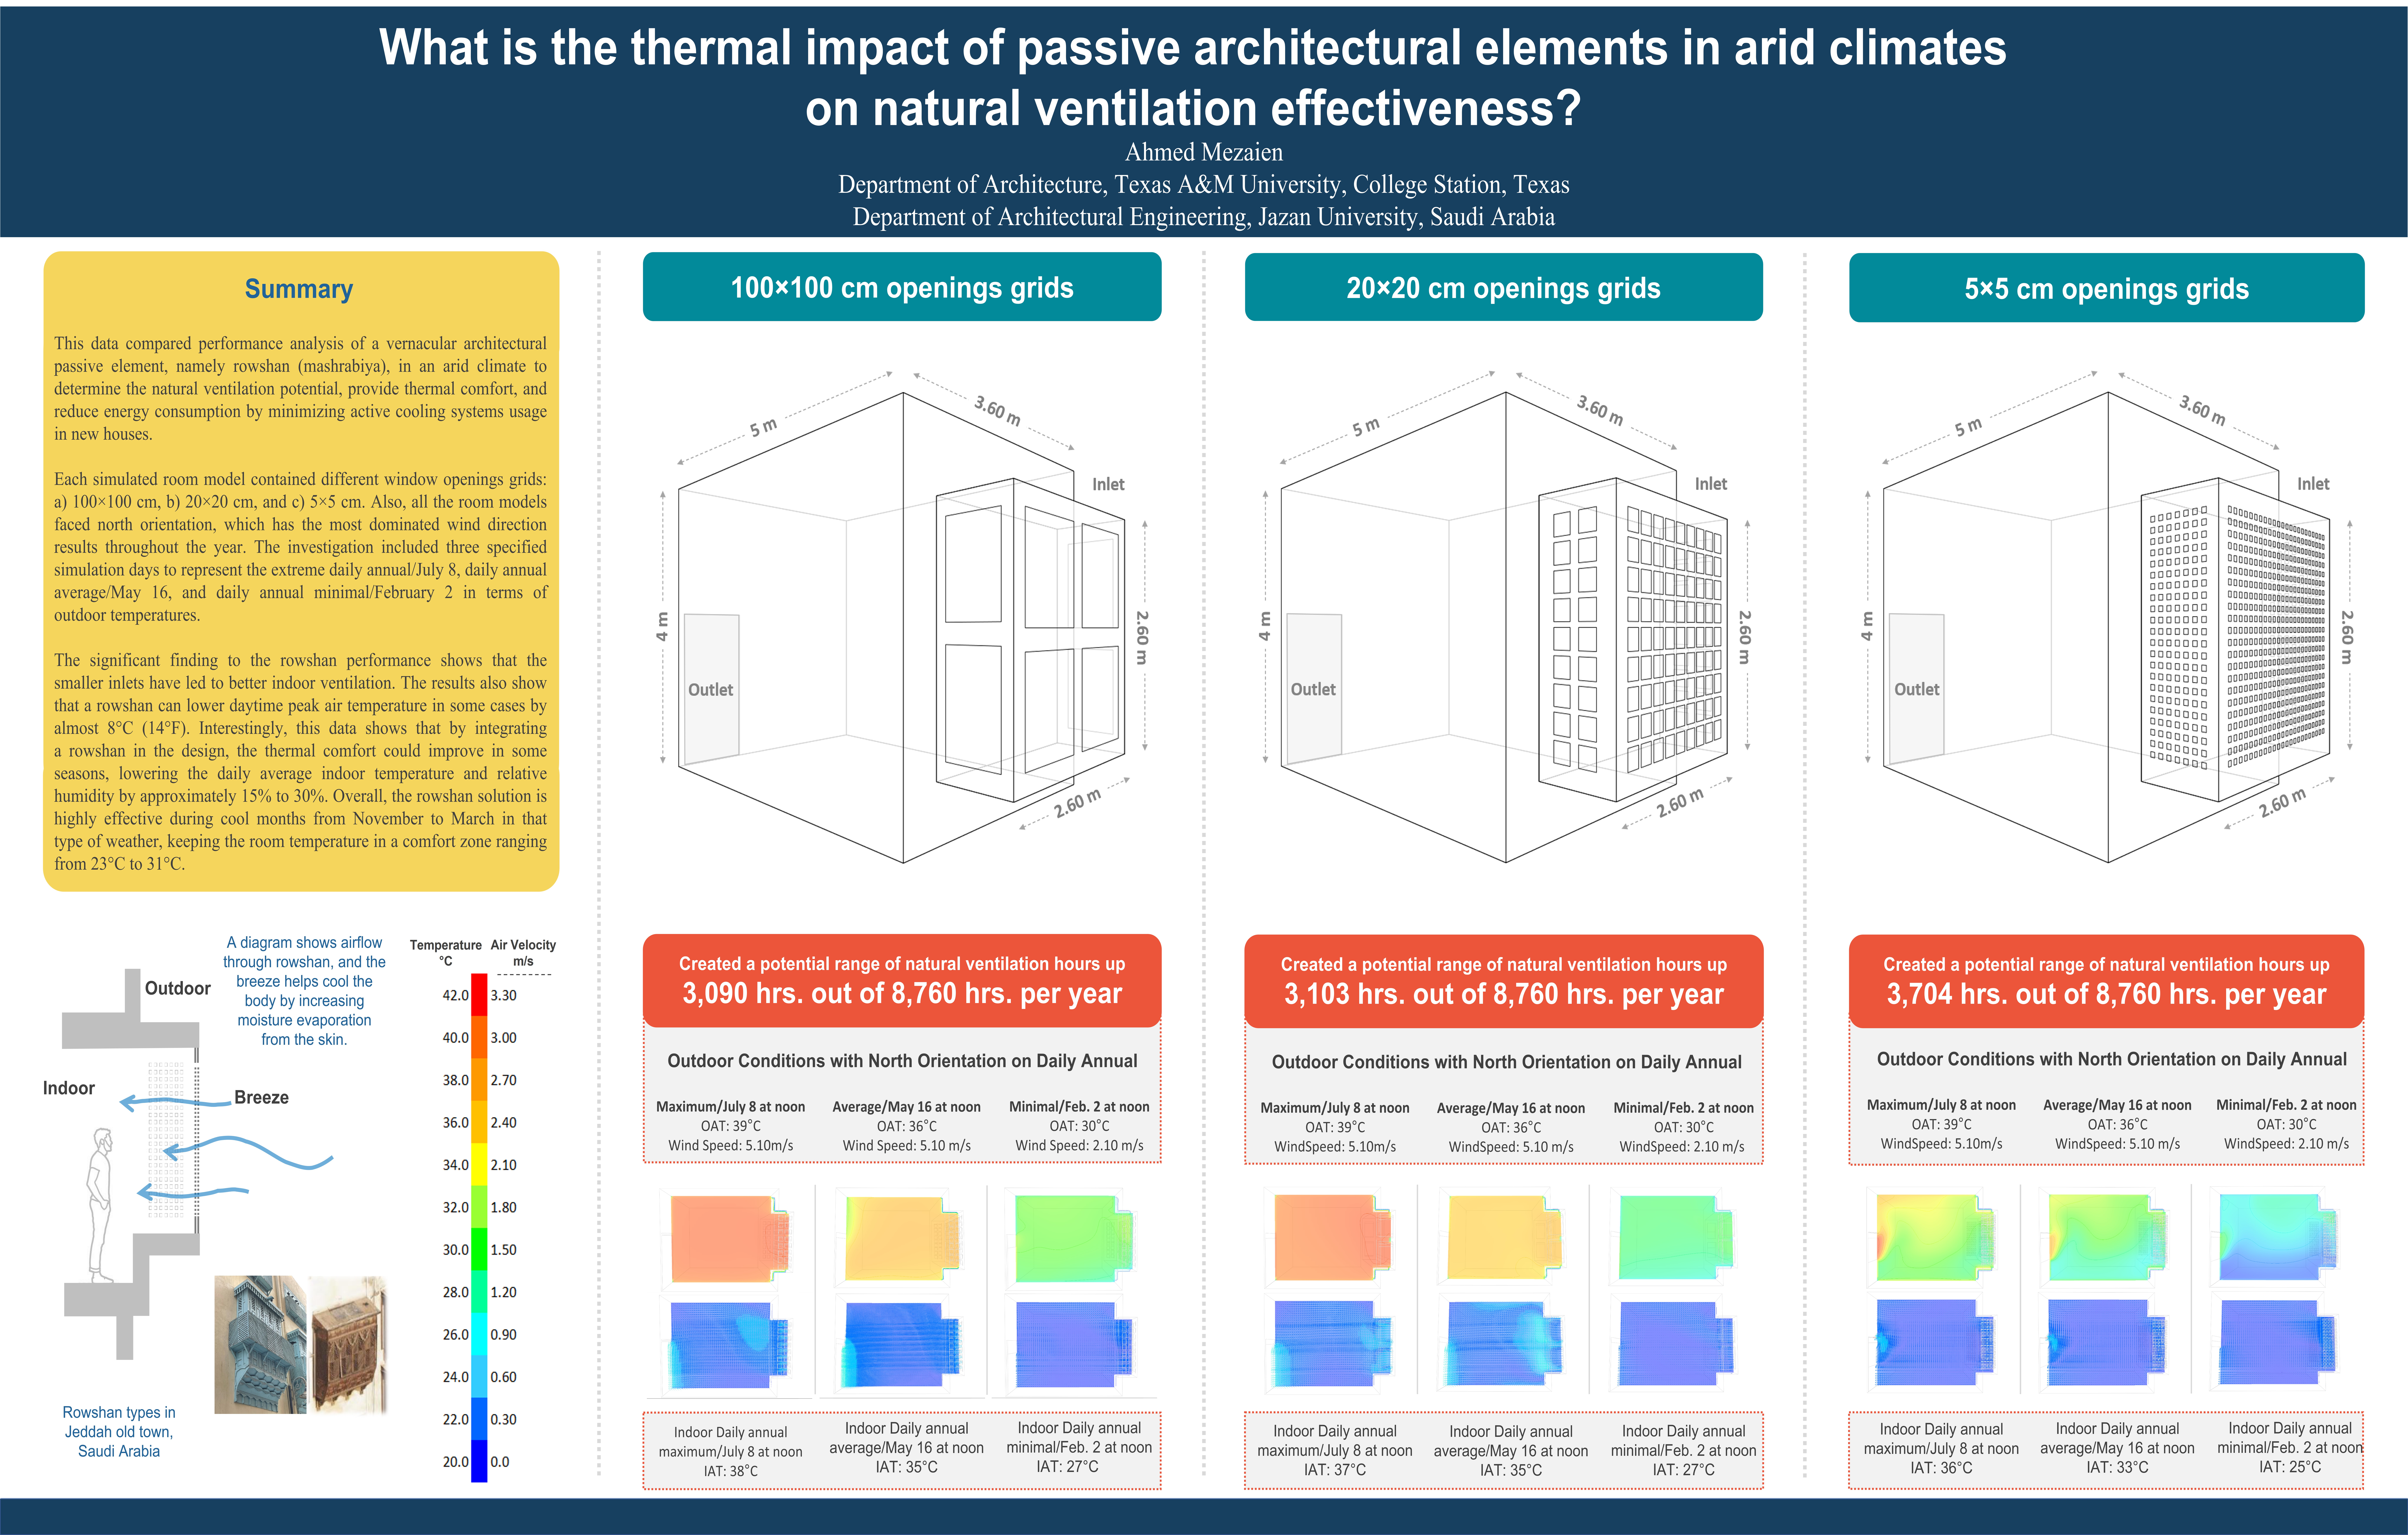 What is the impact of passive architectural elements in arid climates on natural ventilation effectiveness??